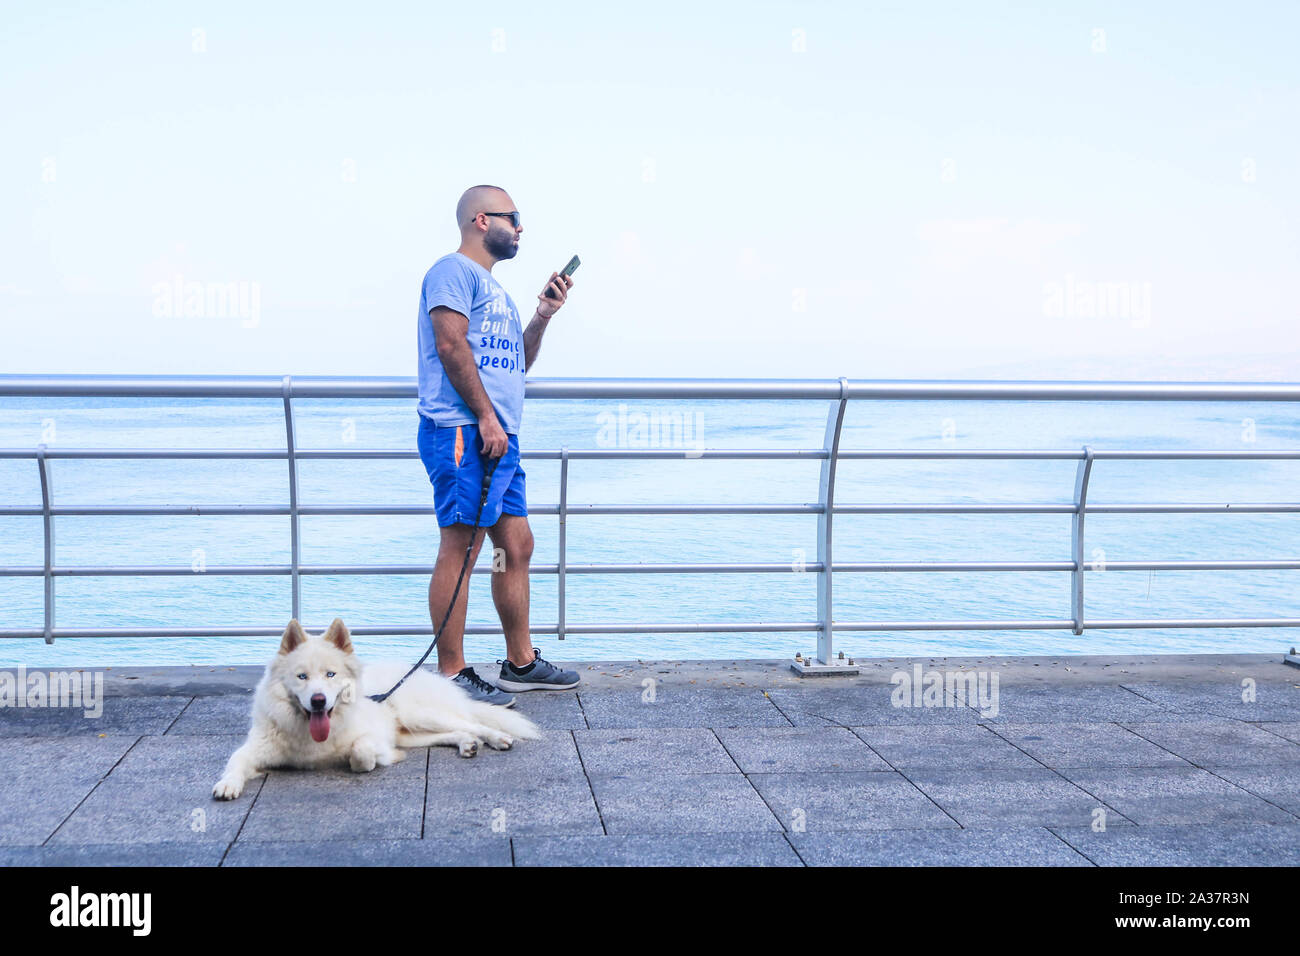 October 6, 2019, Beirut, Lebanon: A man with his dog at the seafront during a hot and humid day in Beirut. (Credit Image: © Amer Ghazzal/SOPA Images via ZUMA Wire) Stock Photo